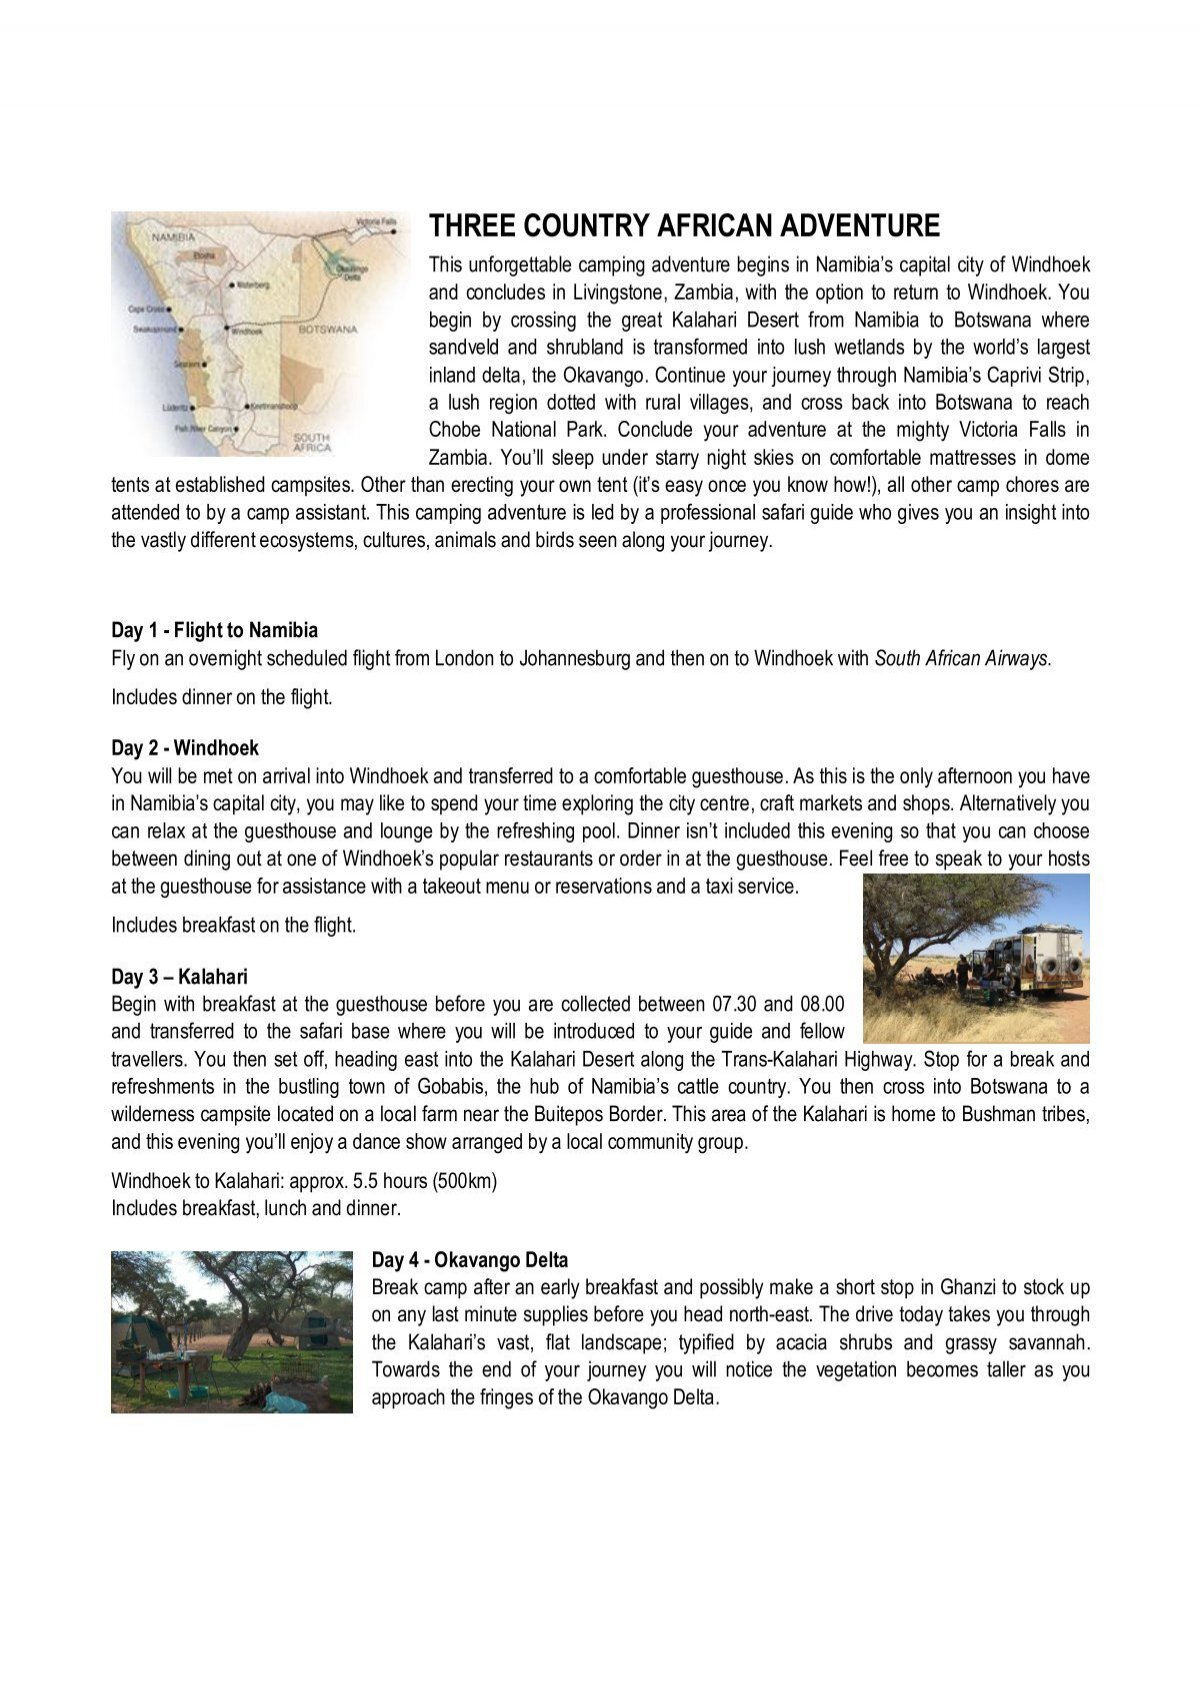 Summary of Three Country African Adventure - Wild about Africa